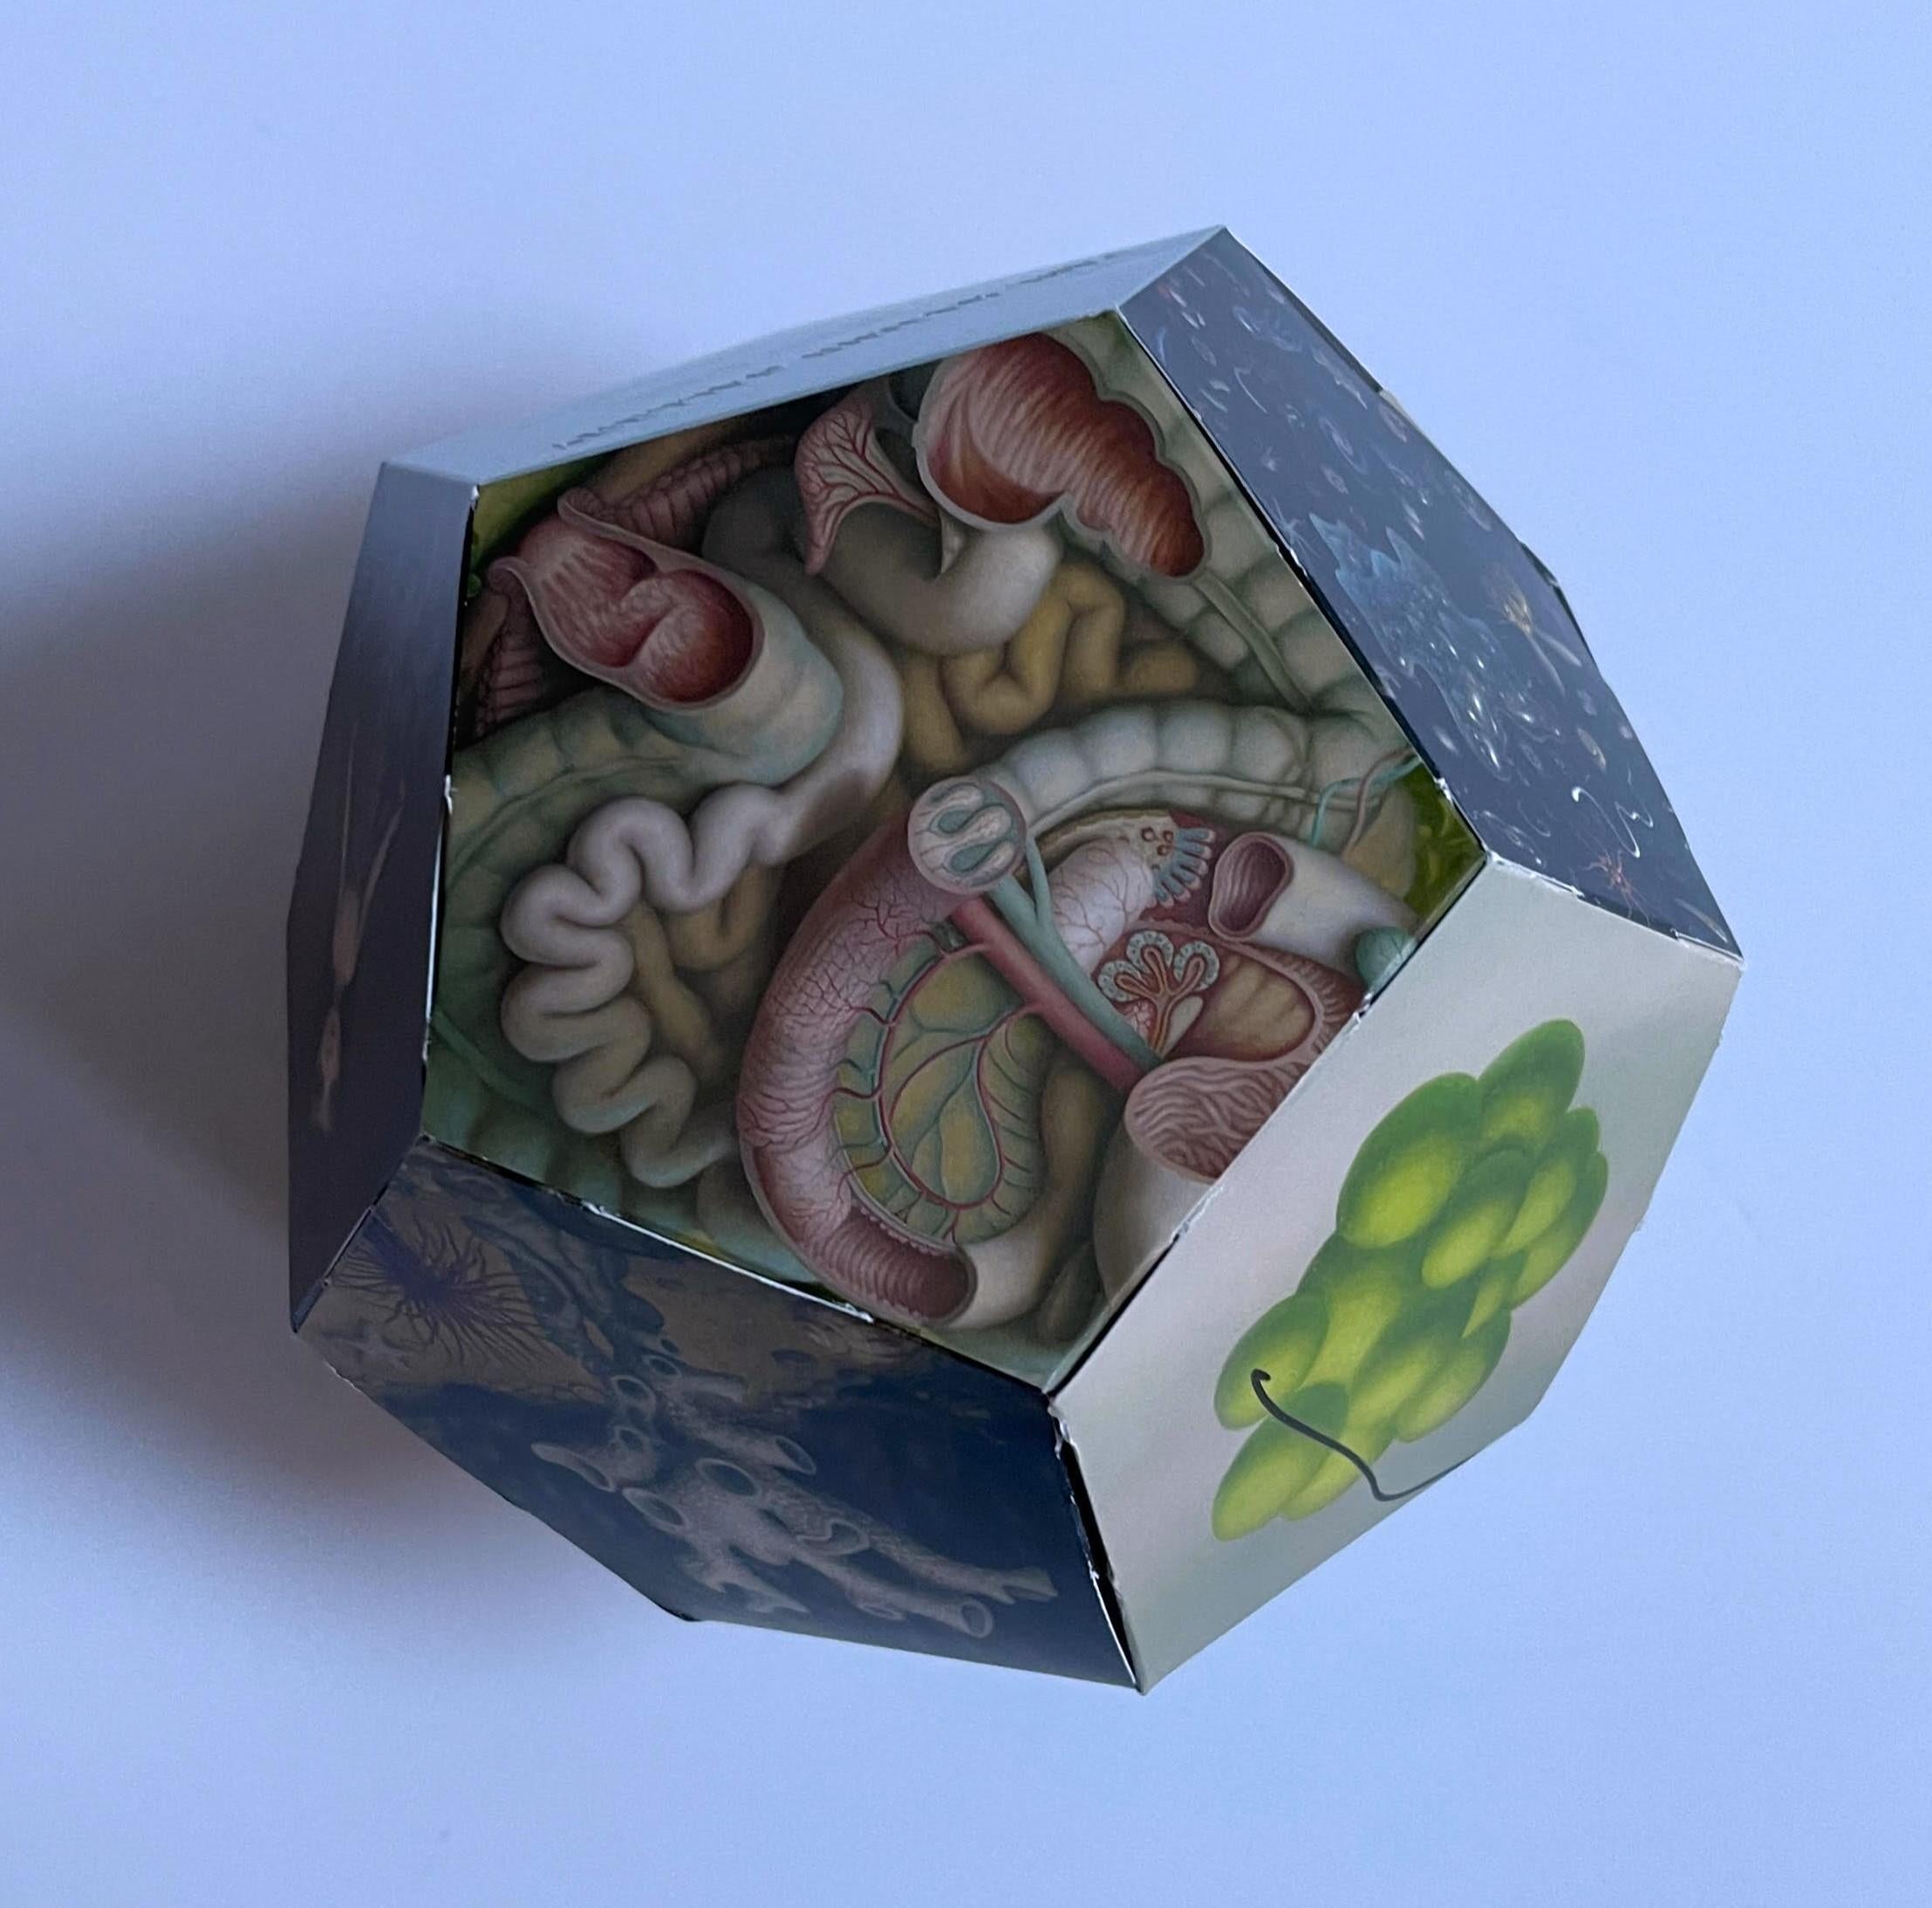 2 part invitation forming a 3-D Dodecahedron Hand signed by Mark Ryden at Kasmin For Sale 3